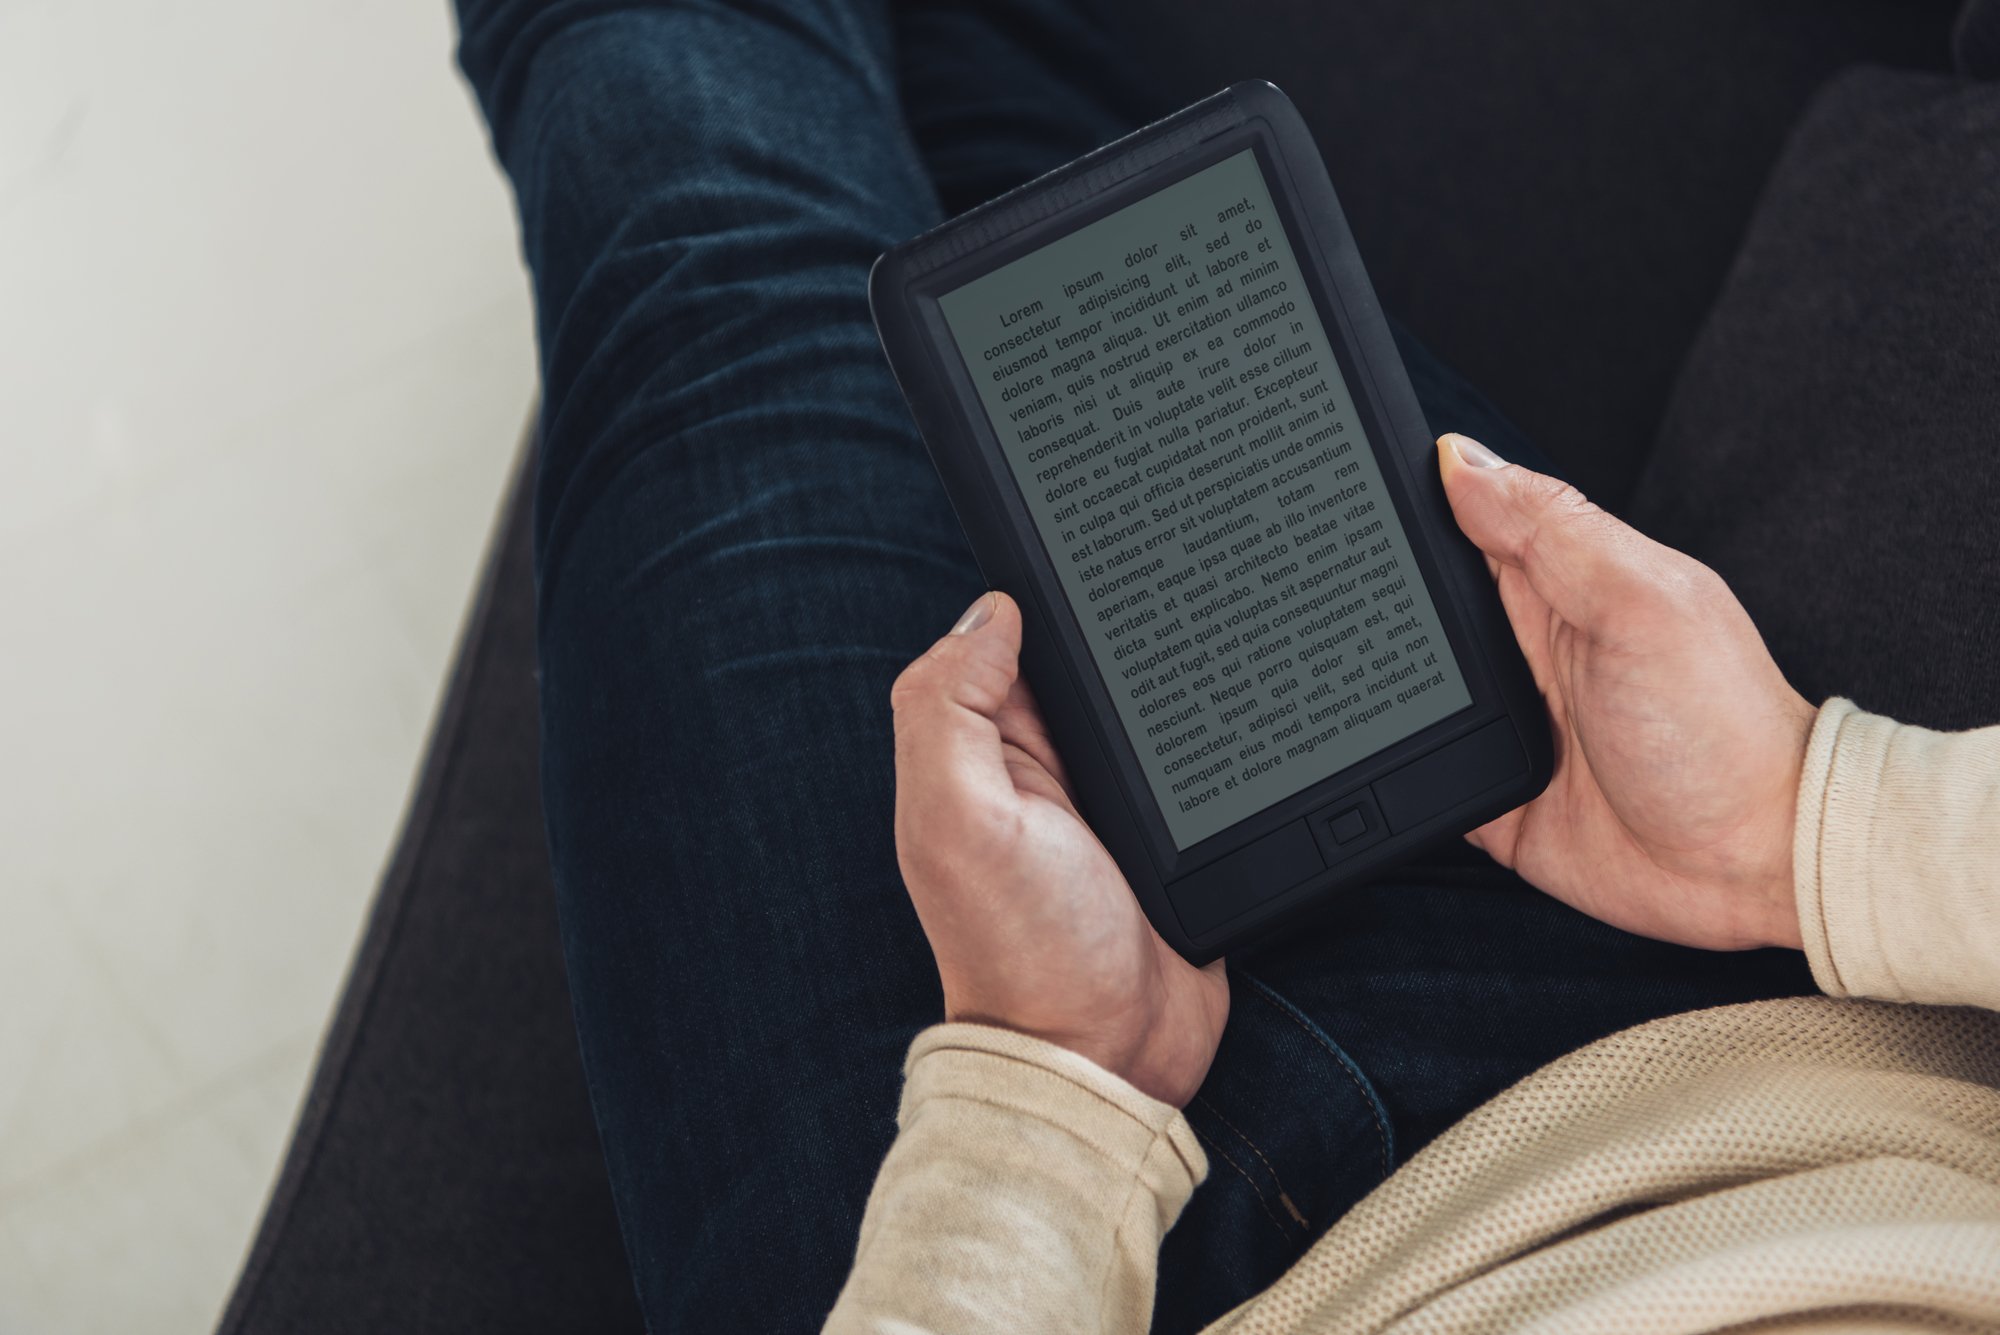 Top view of ebook in hands of man sitting on sofa